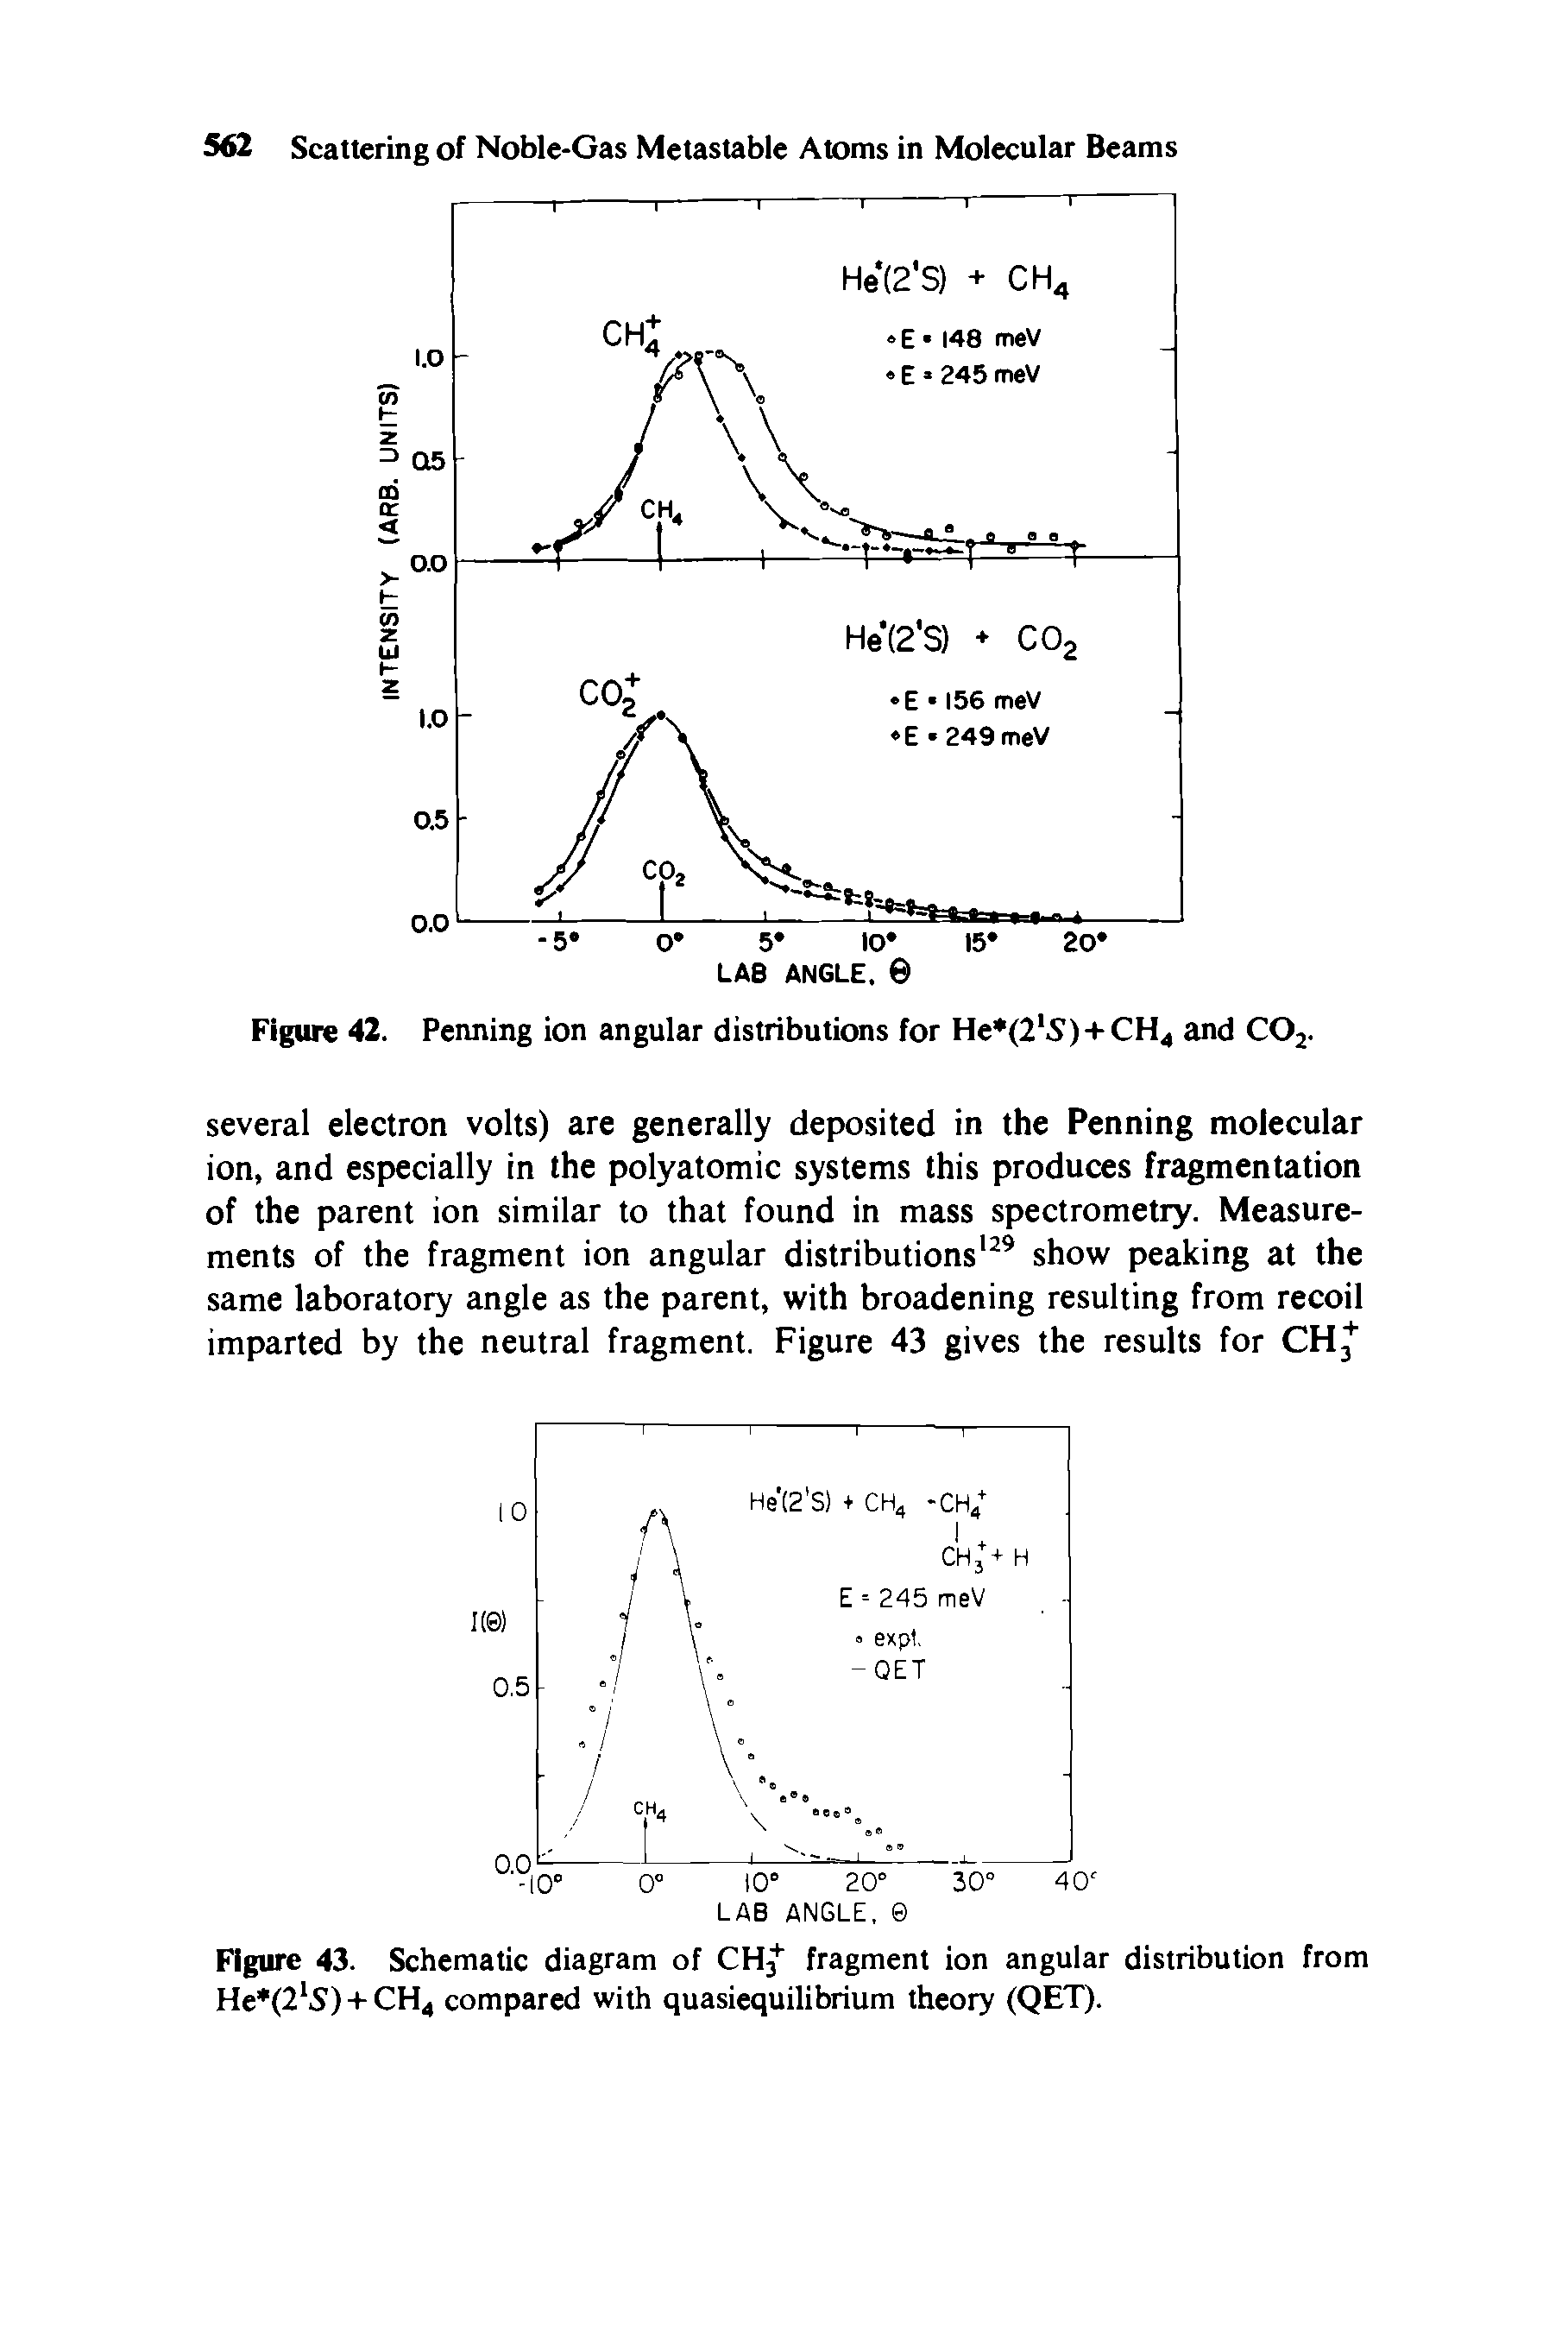 Figure 43. Schematic diagram of CH3+ fragment ion angular distribution from He (2 S) + CH4 compared with quasiequilibrium theory (QET).